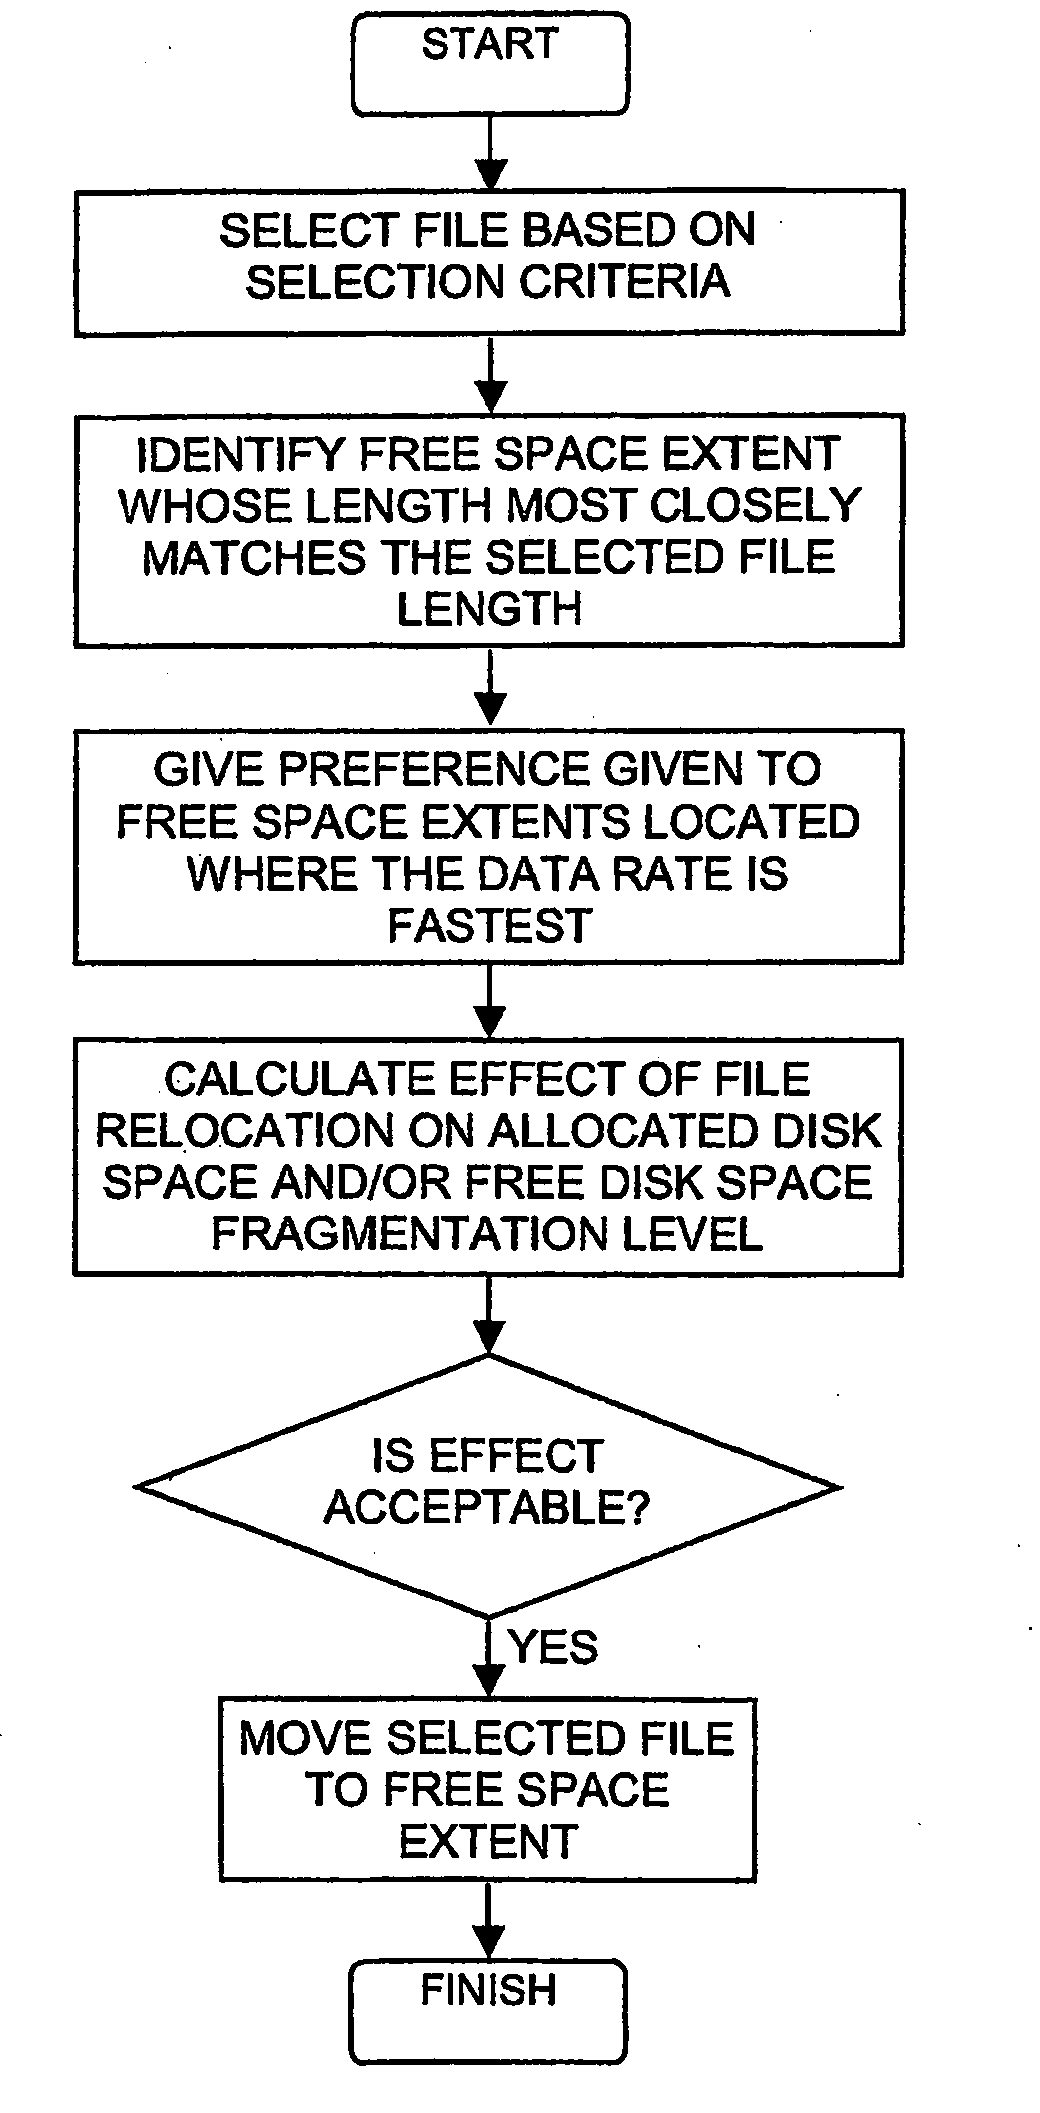 Measuring fragmentation on direct access storage devices and defragmentation thereof